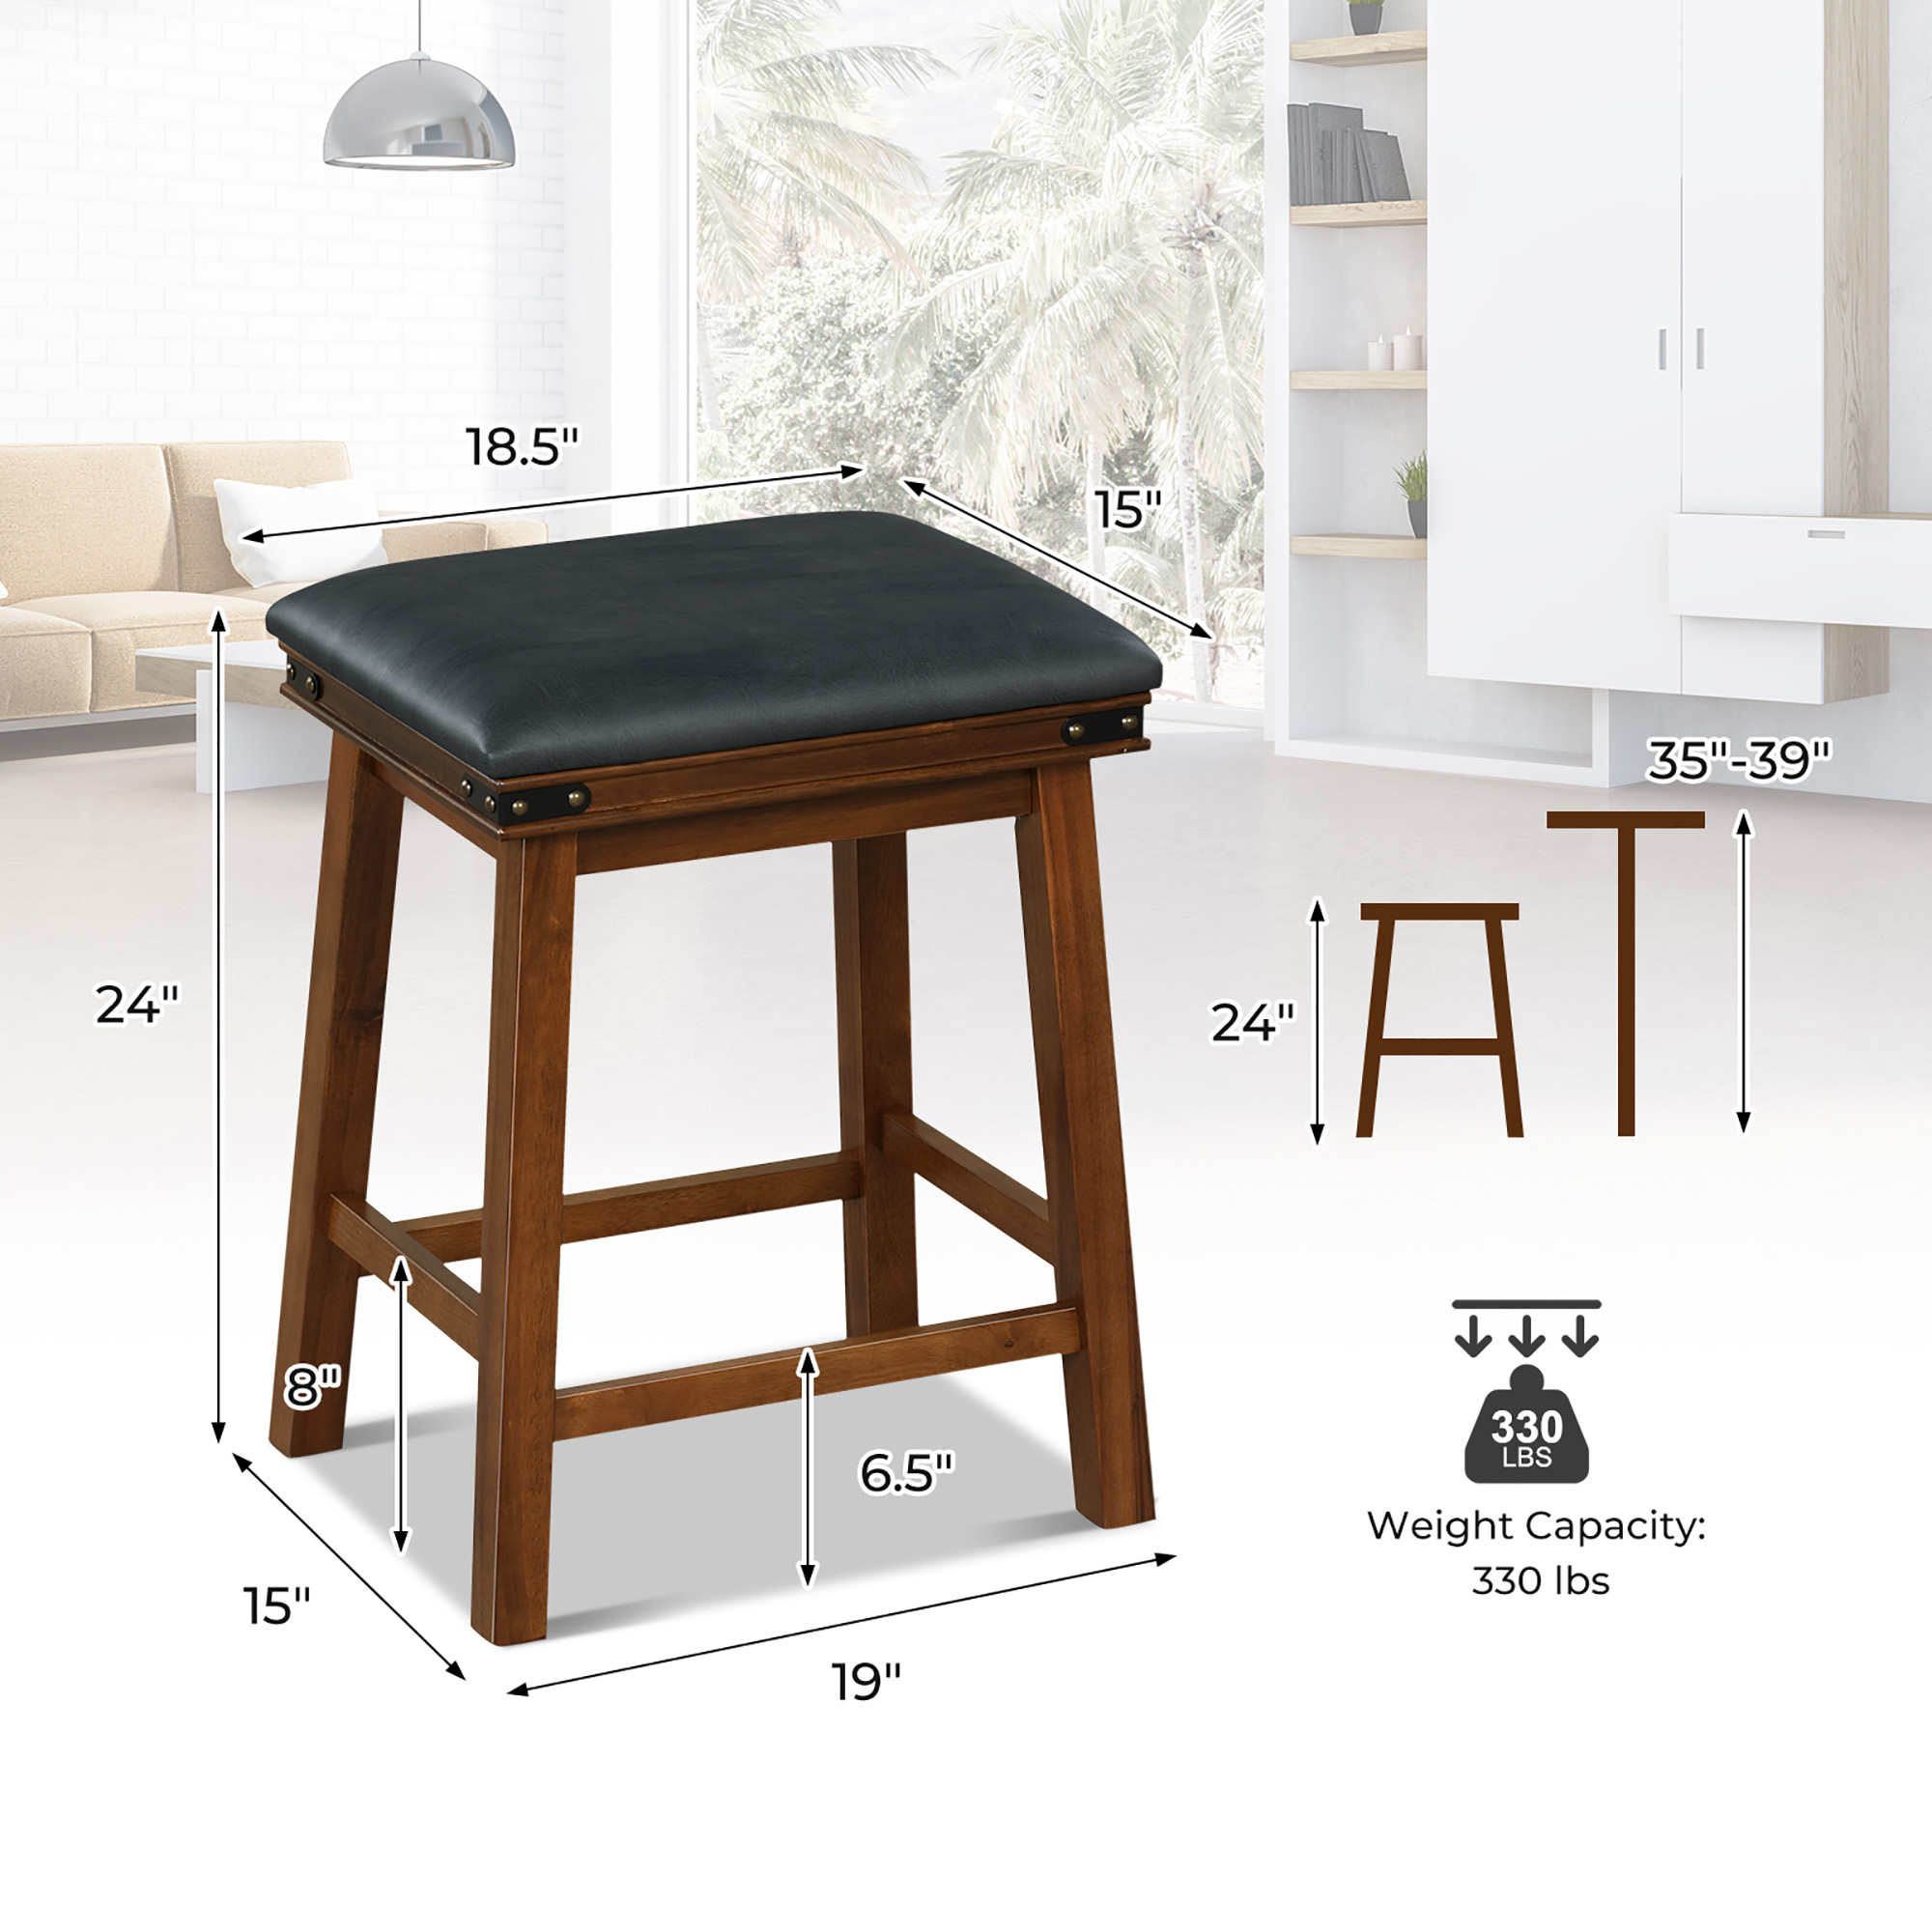 Set Of 4 PU Leather Bar Stools 24'' Counter Height Dining Stools W/ Upholstered Seat